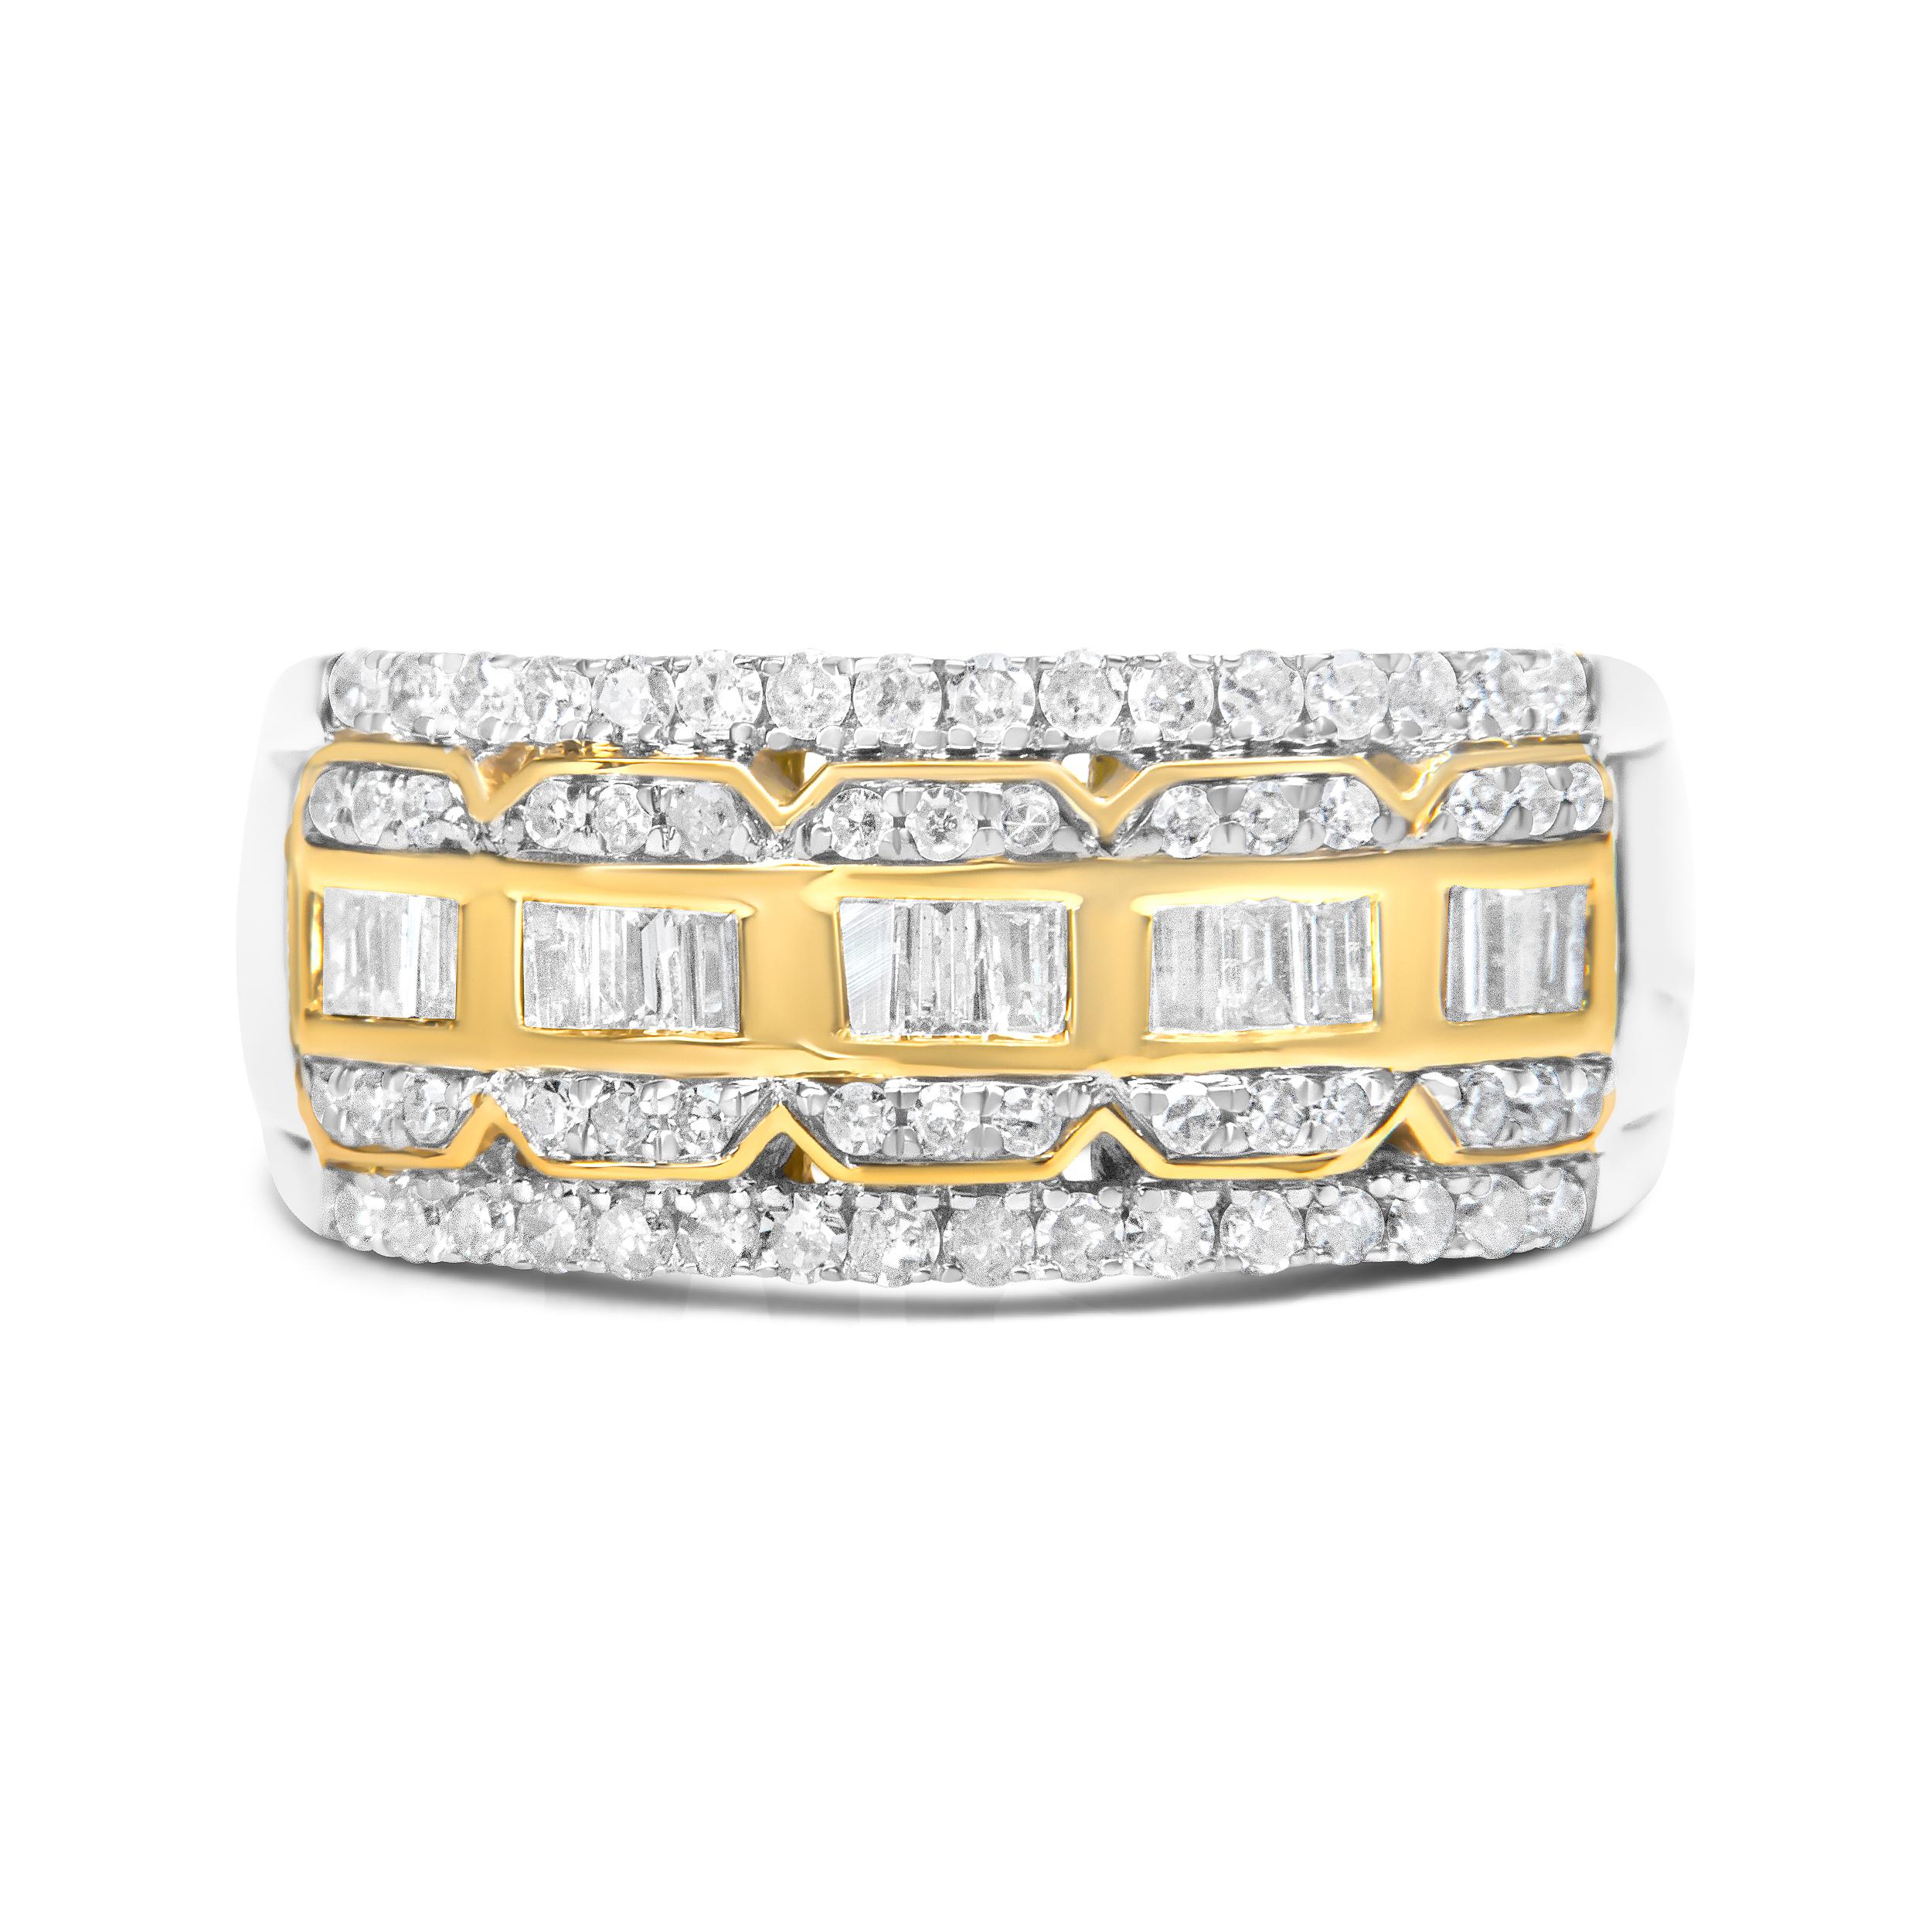 For Sale:  10K White and Yellow Gold 1.0 Carat Diamond Art Deco Multi-Row Ring Band 2